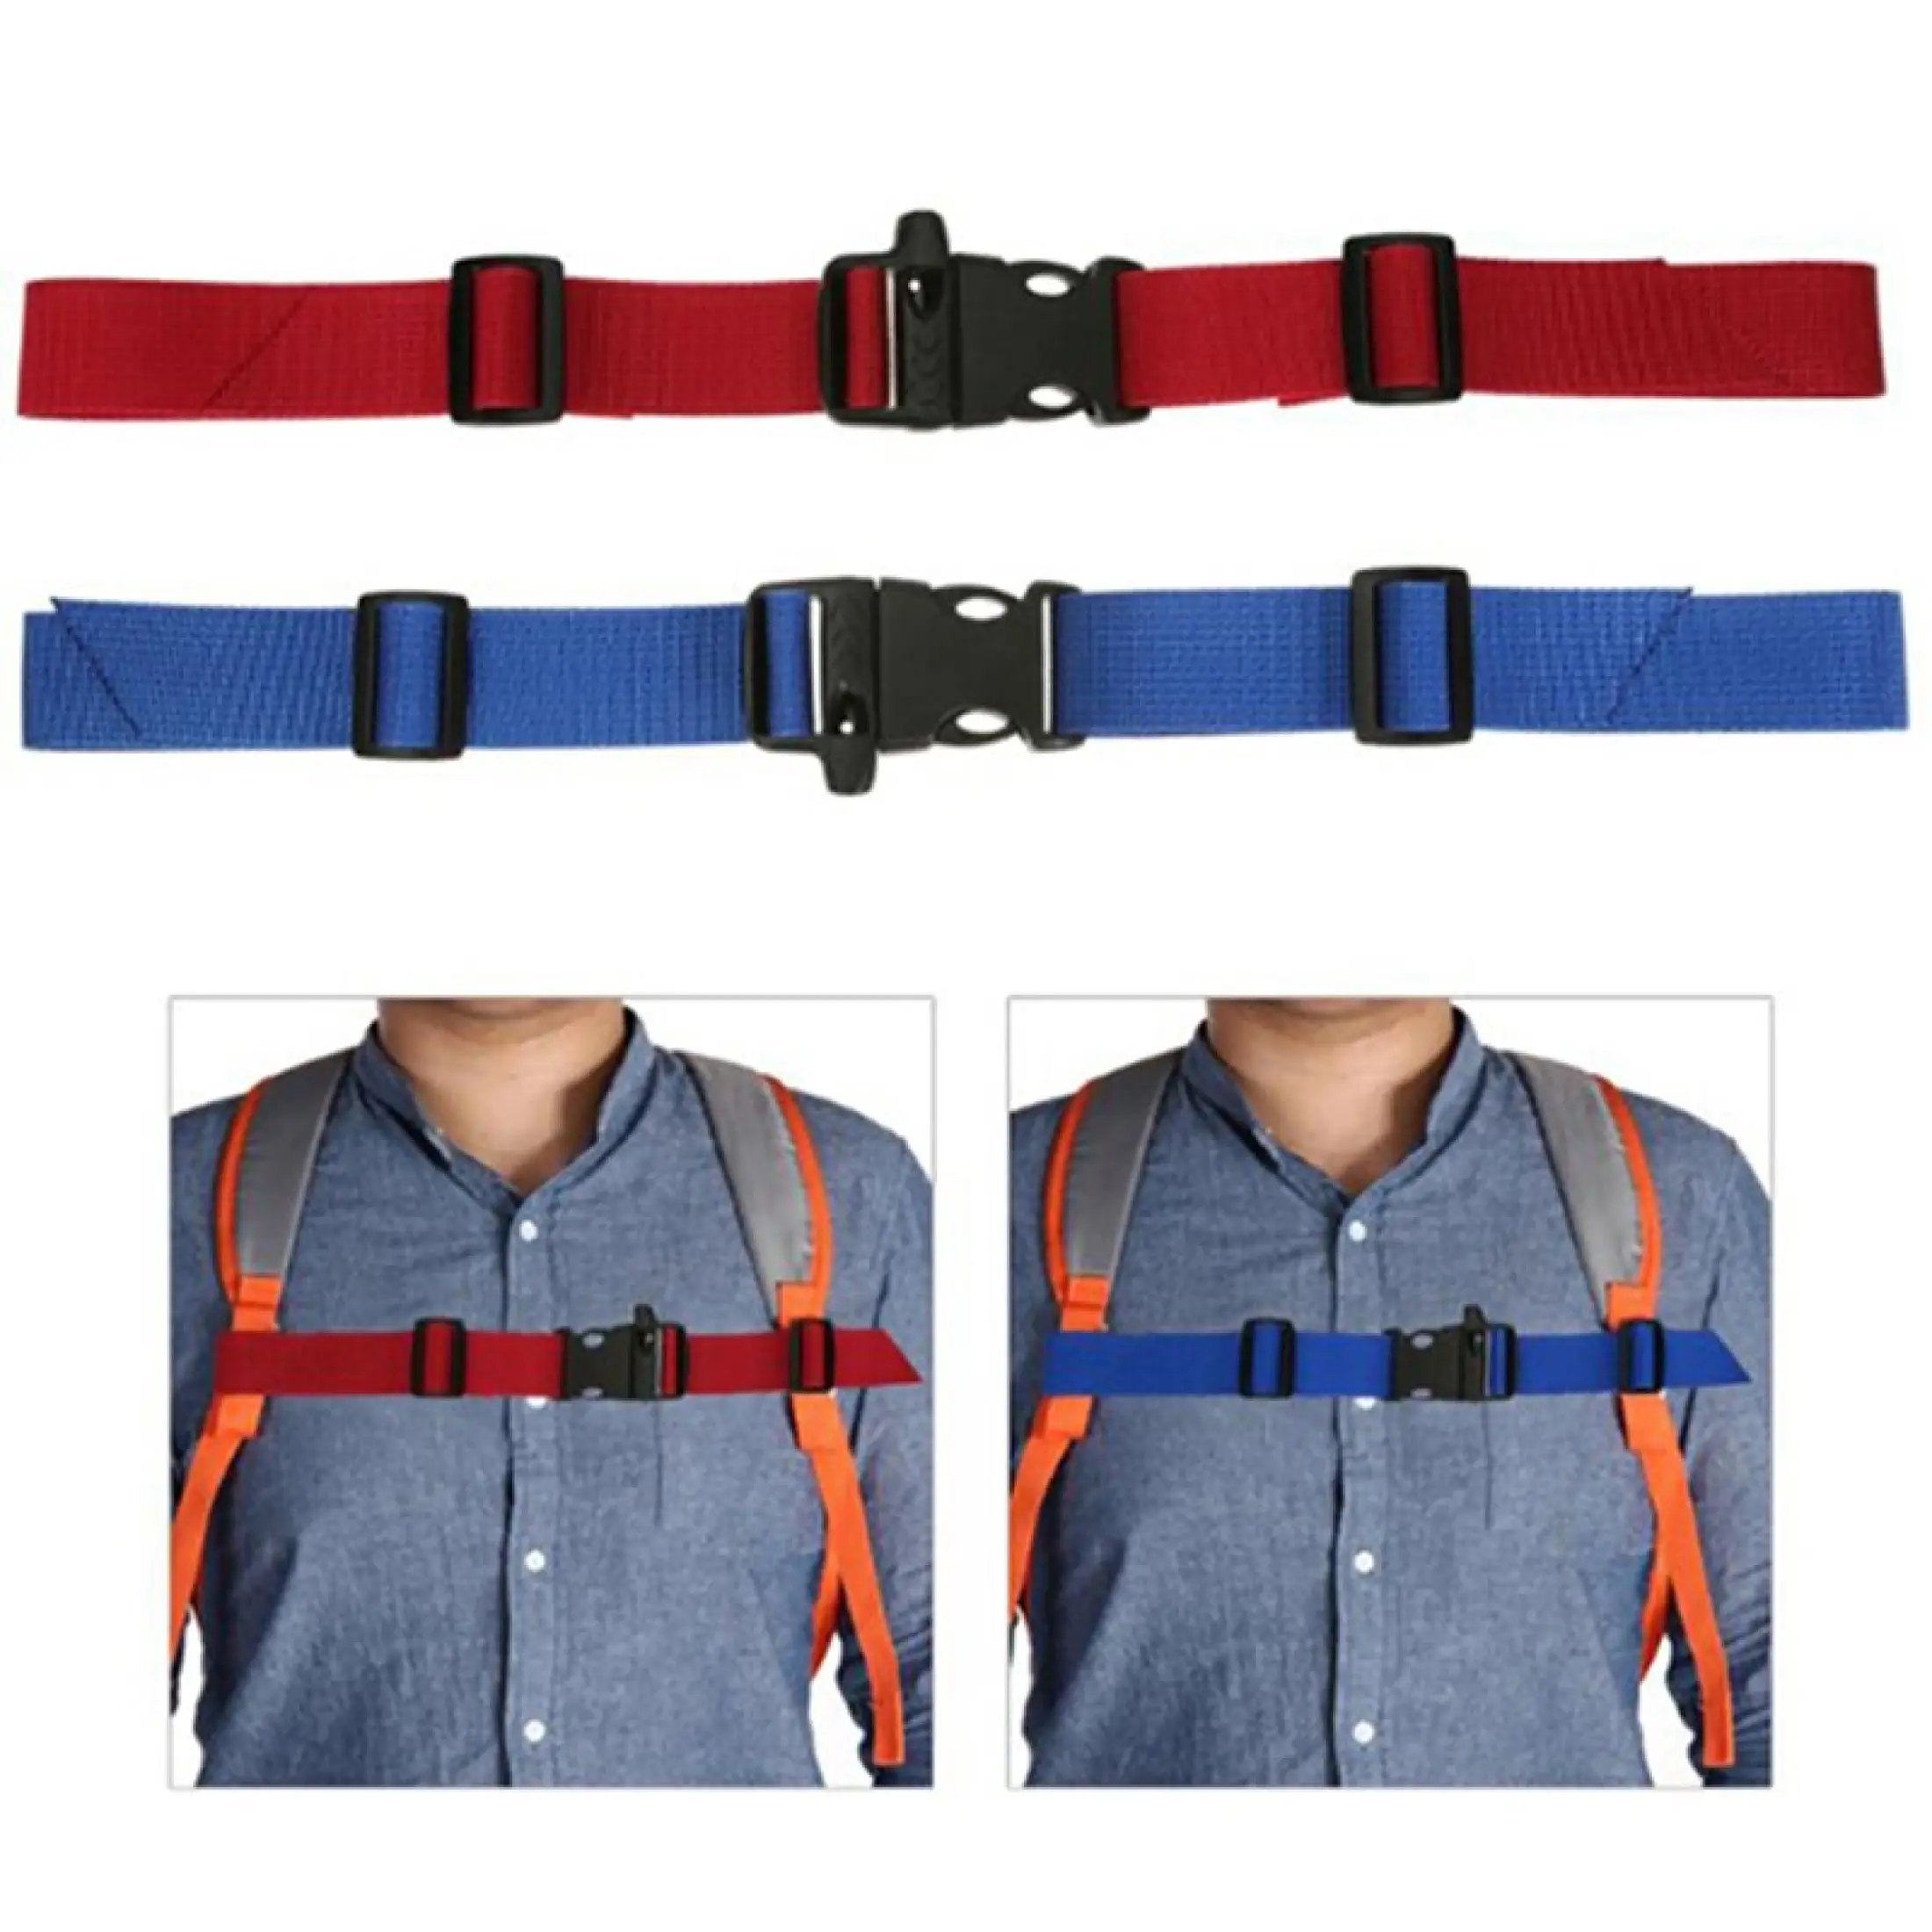 Webbing Buckle Clip Strap Backpack Bag Harness Nylon Quick Release Safety New